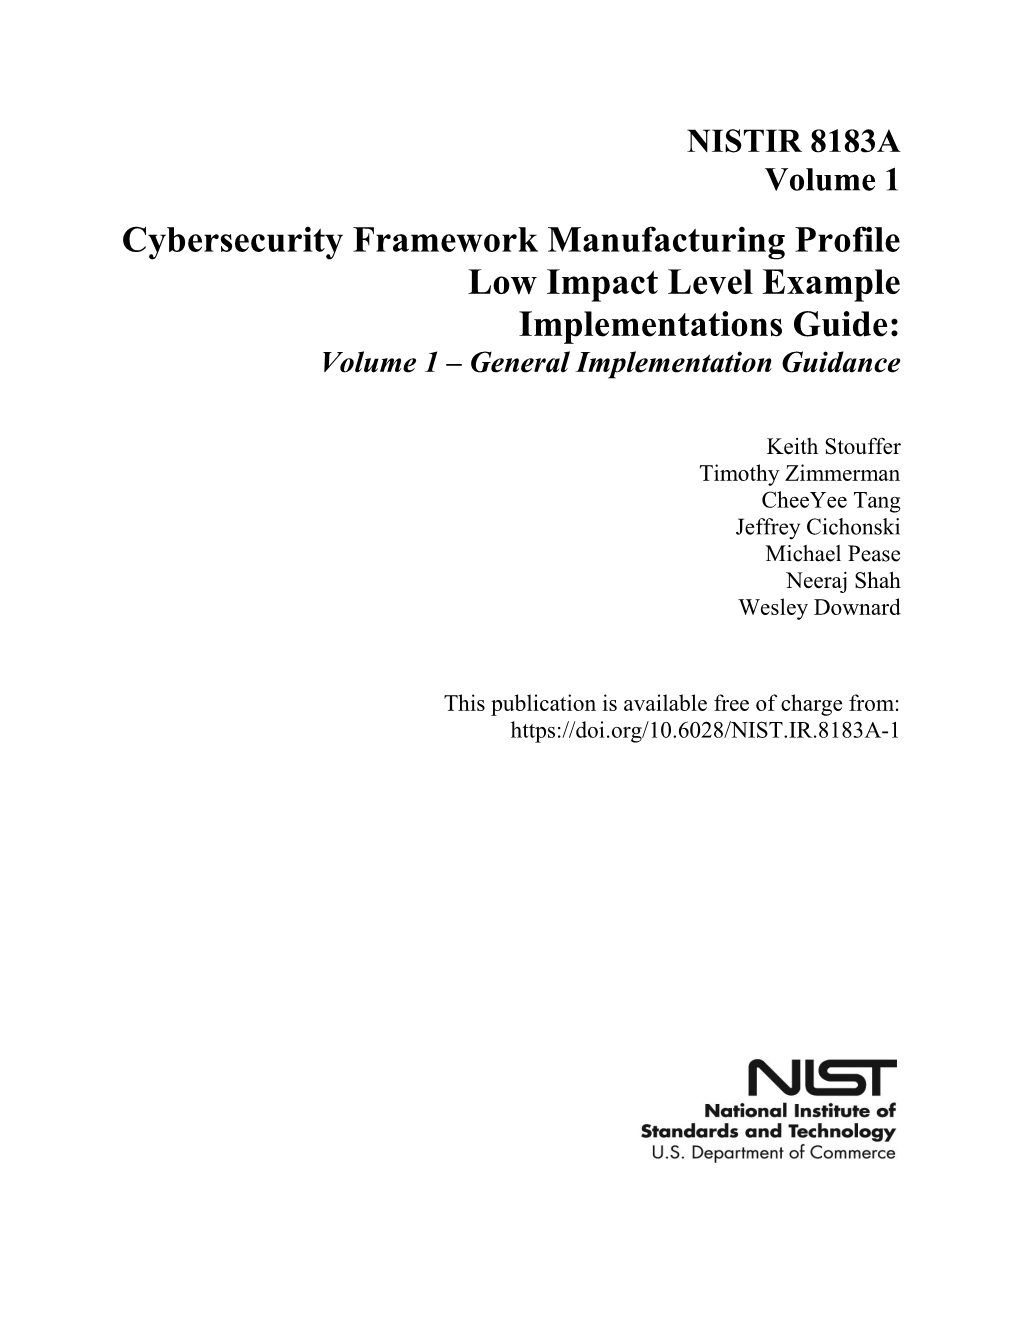 Cybersecurity Framework Manufacturing Profile Low Impact Level Example Implementations Guide: Volume 1 – General Implementation Guidance